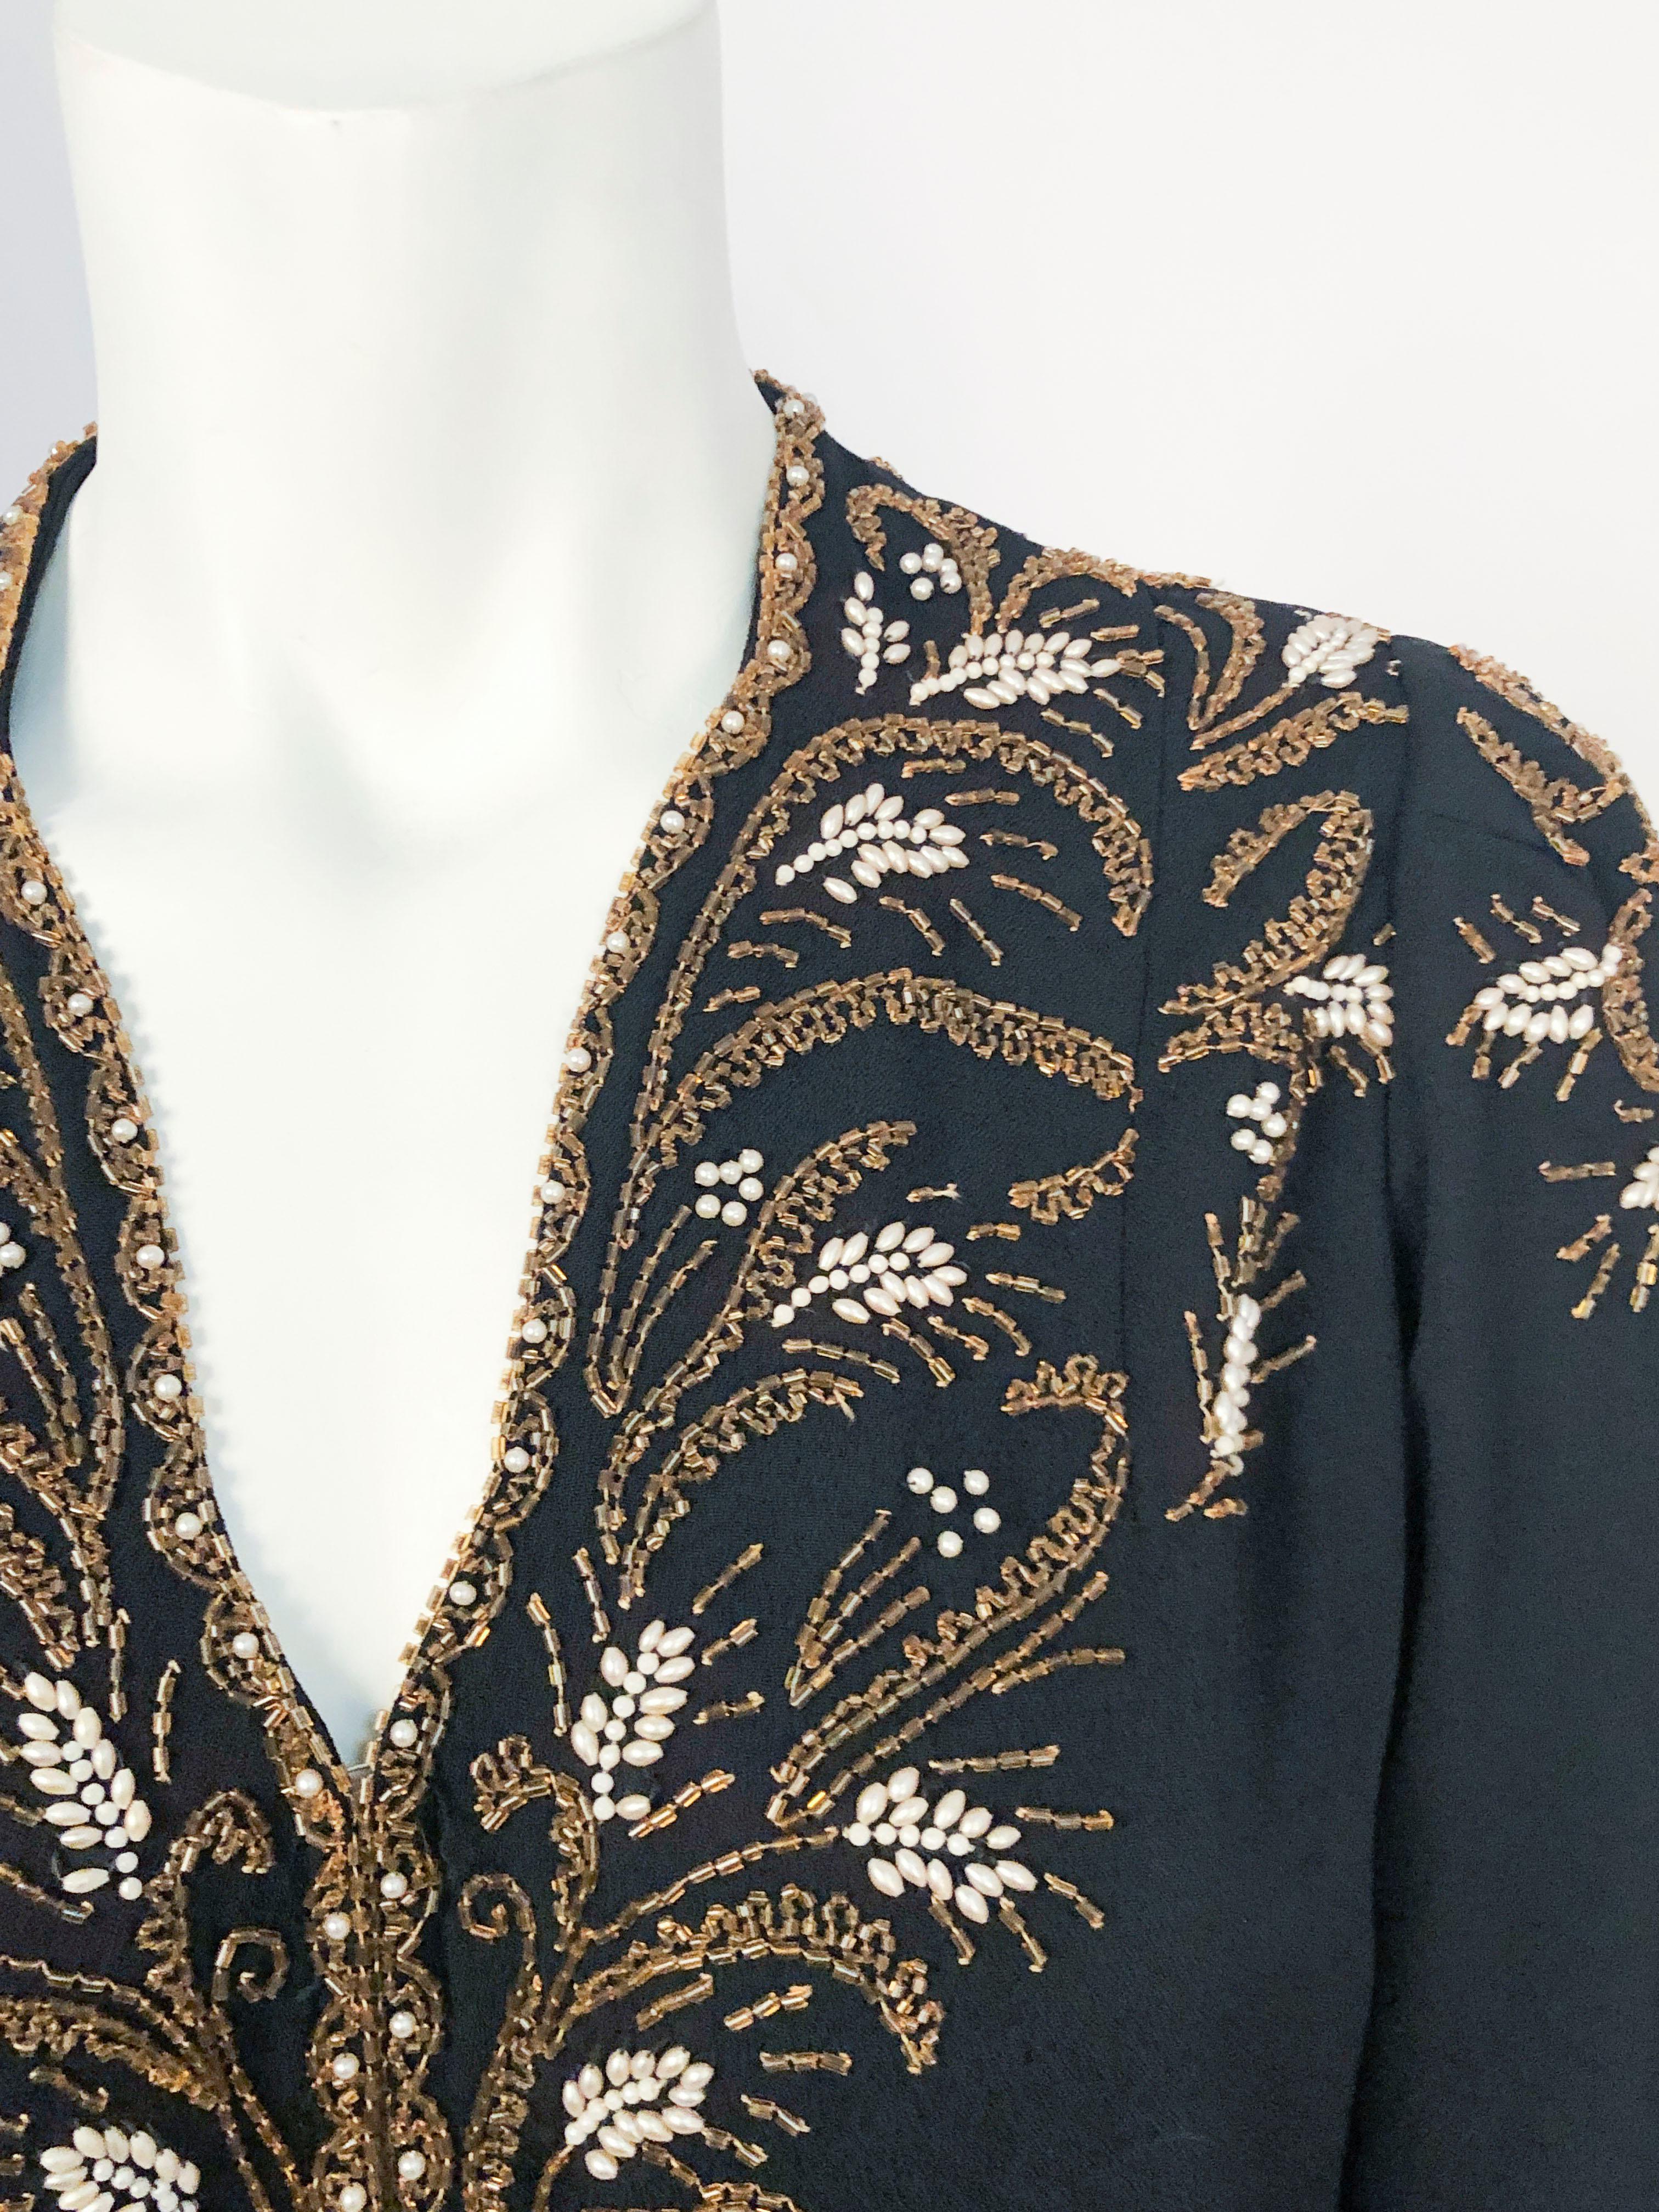 1930s/1940s Black Crepe Evening Jacket with couture style hand-beading in antique gold and pearl. Also has original zippers on wrists for aiding in putting the garment on and taking it off. Shoulder measurement is 14 1/2 inches.